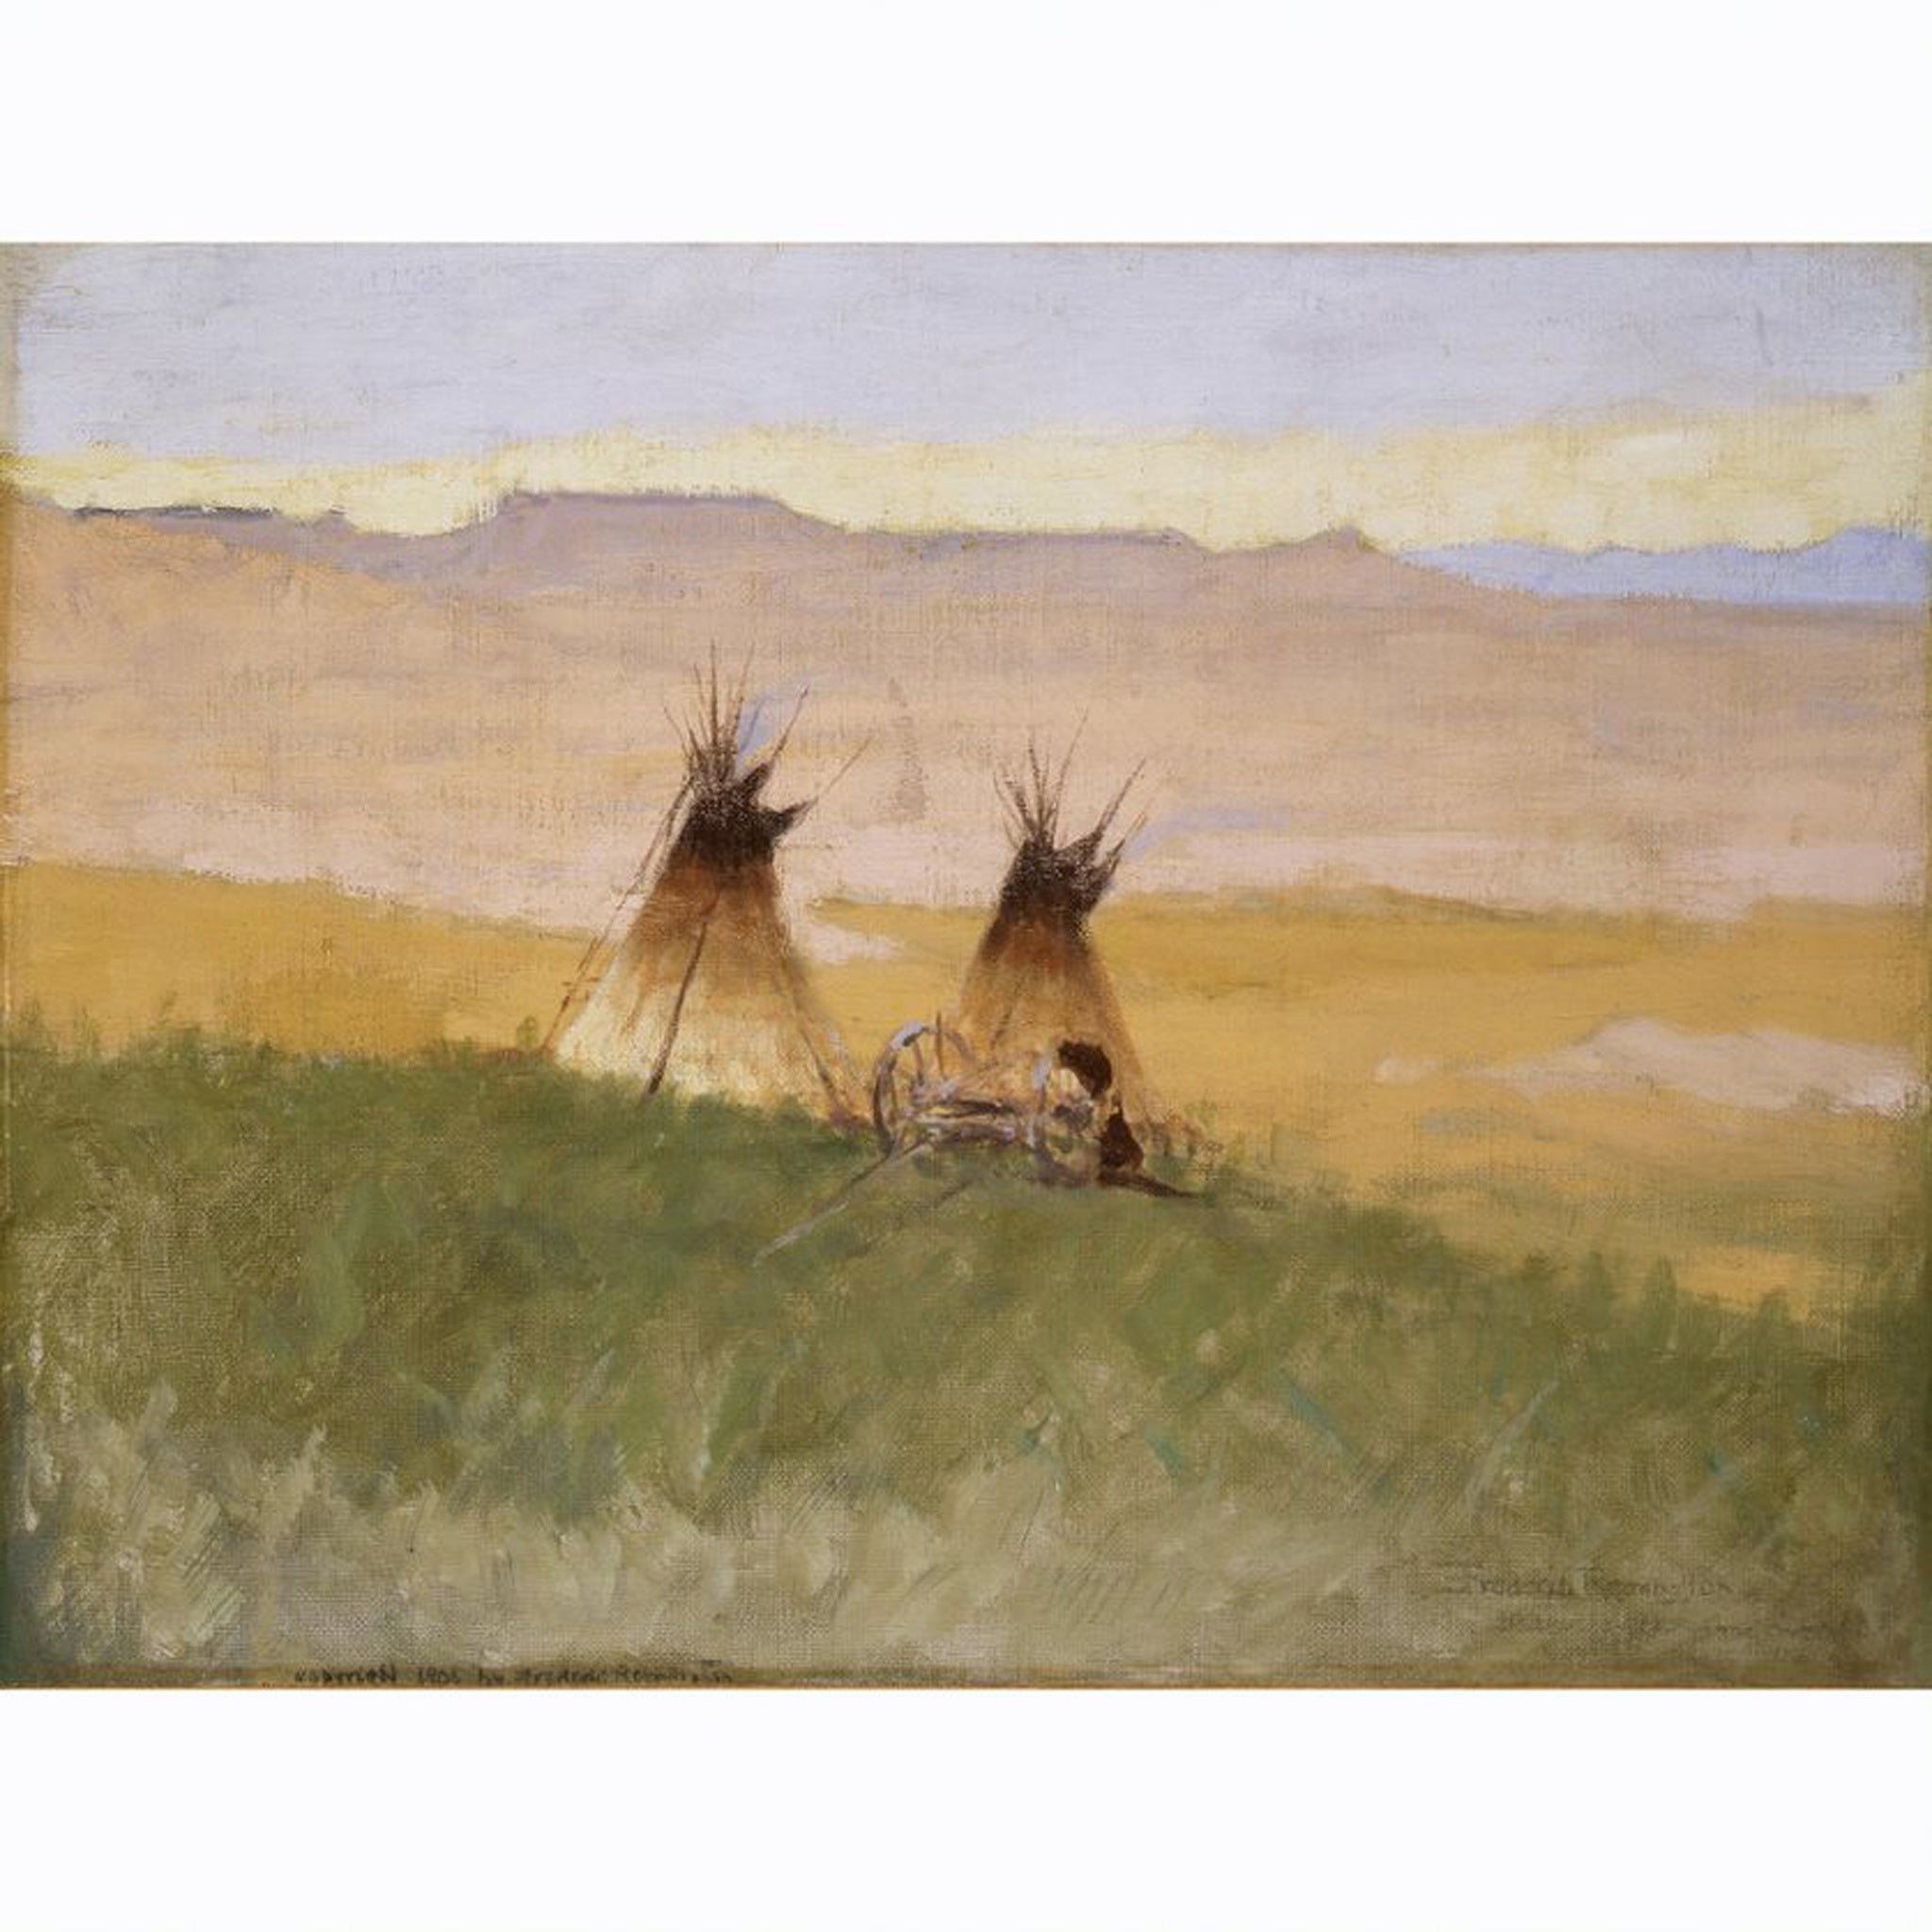 Stormy Morning in the Badlands by Frederic Remington - 31014499